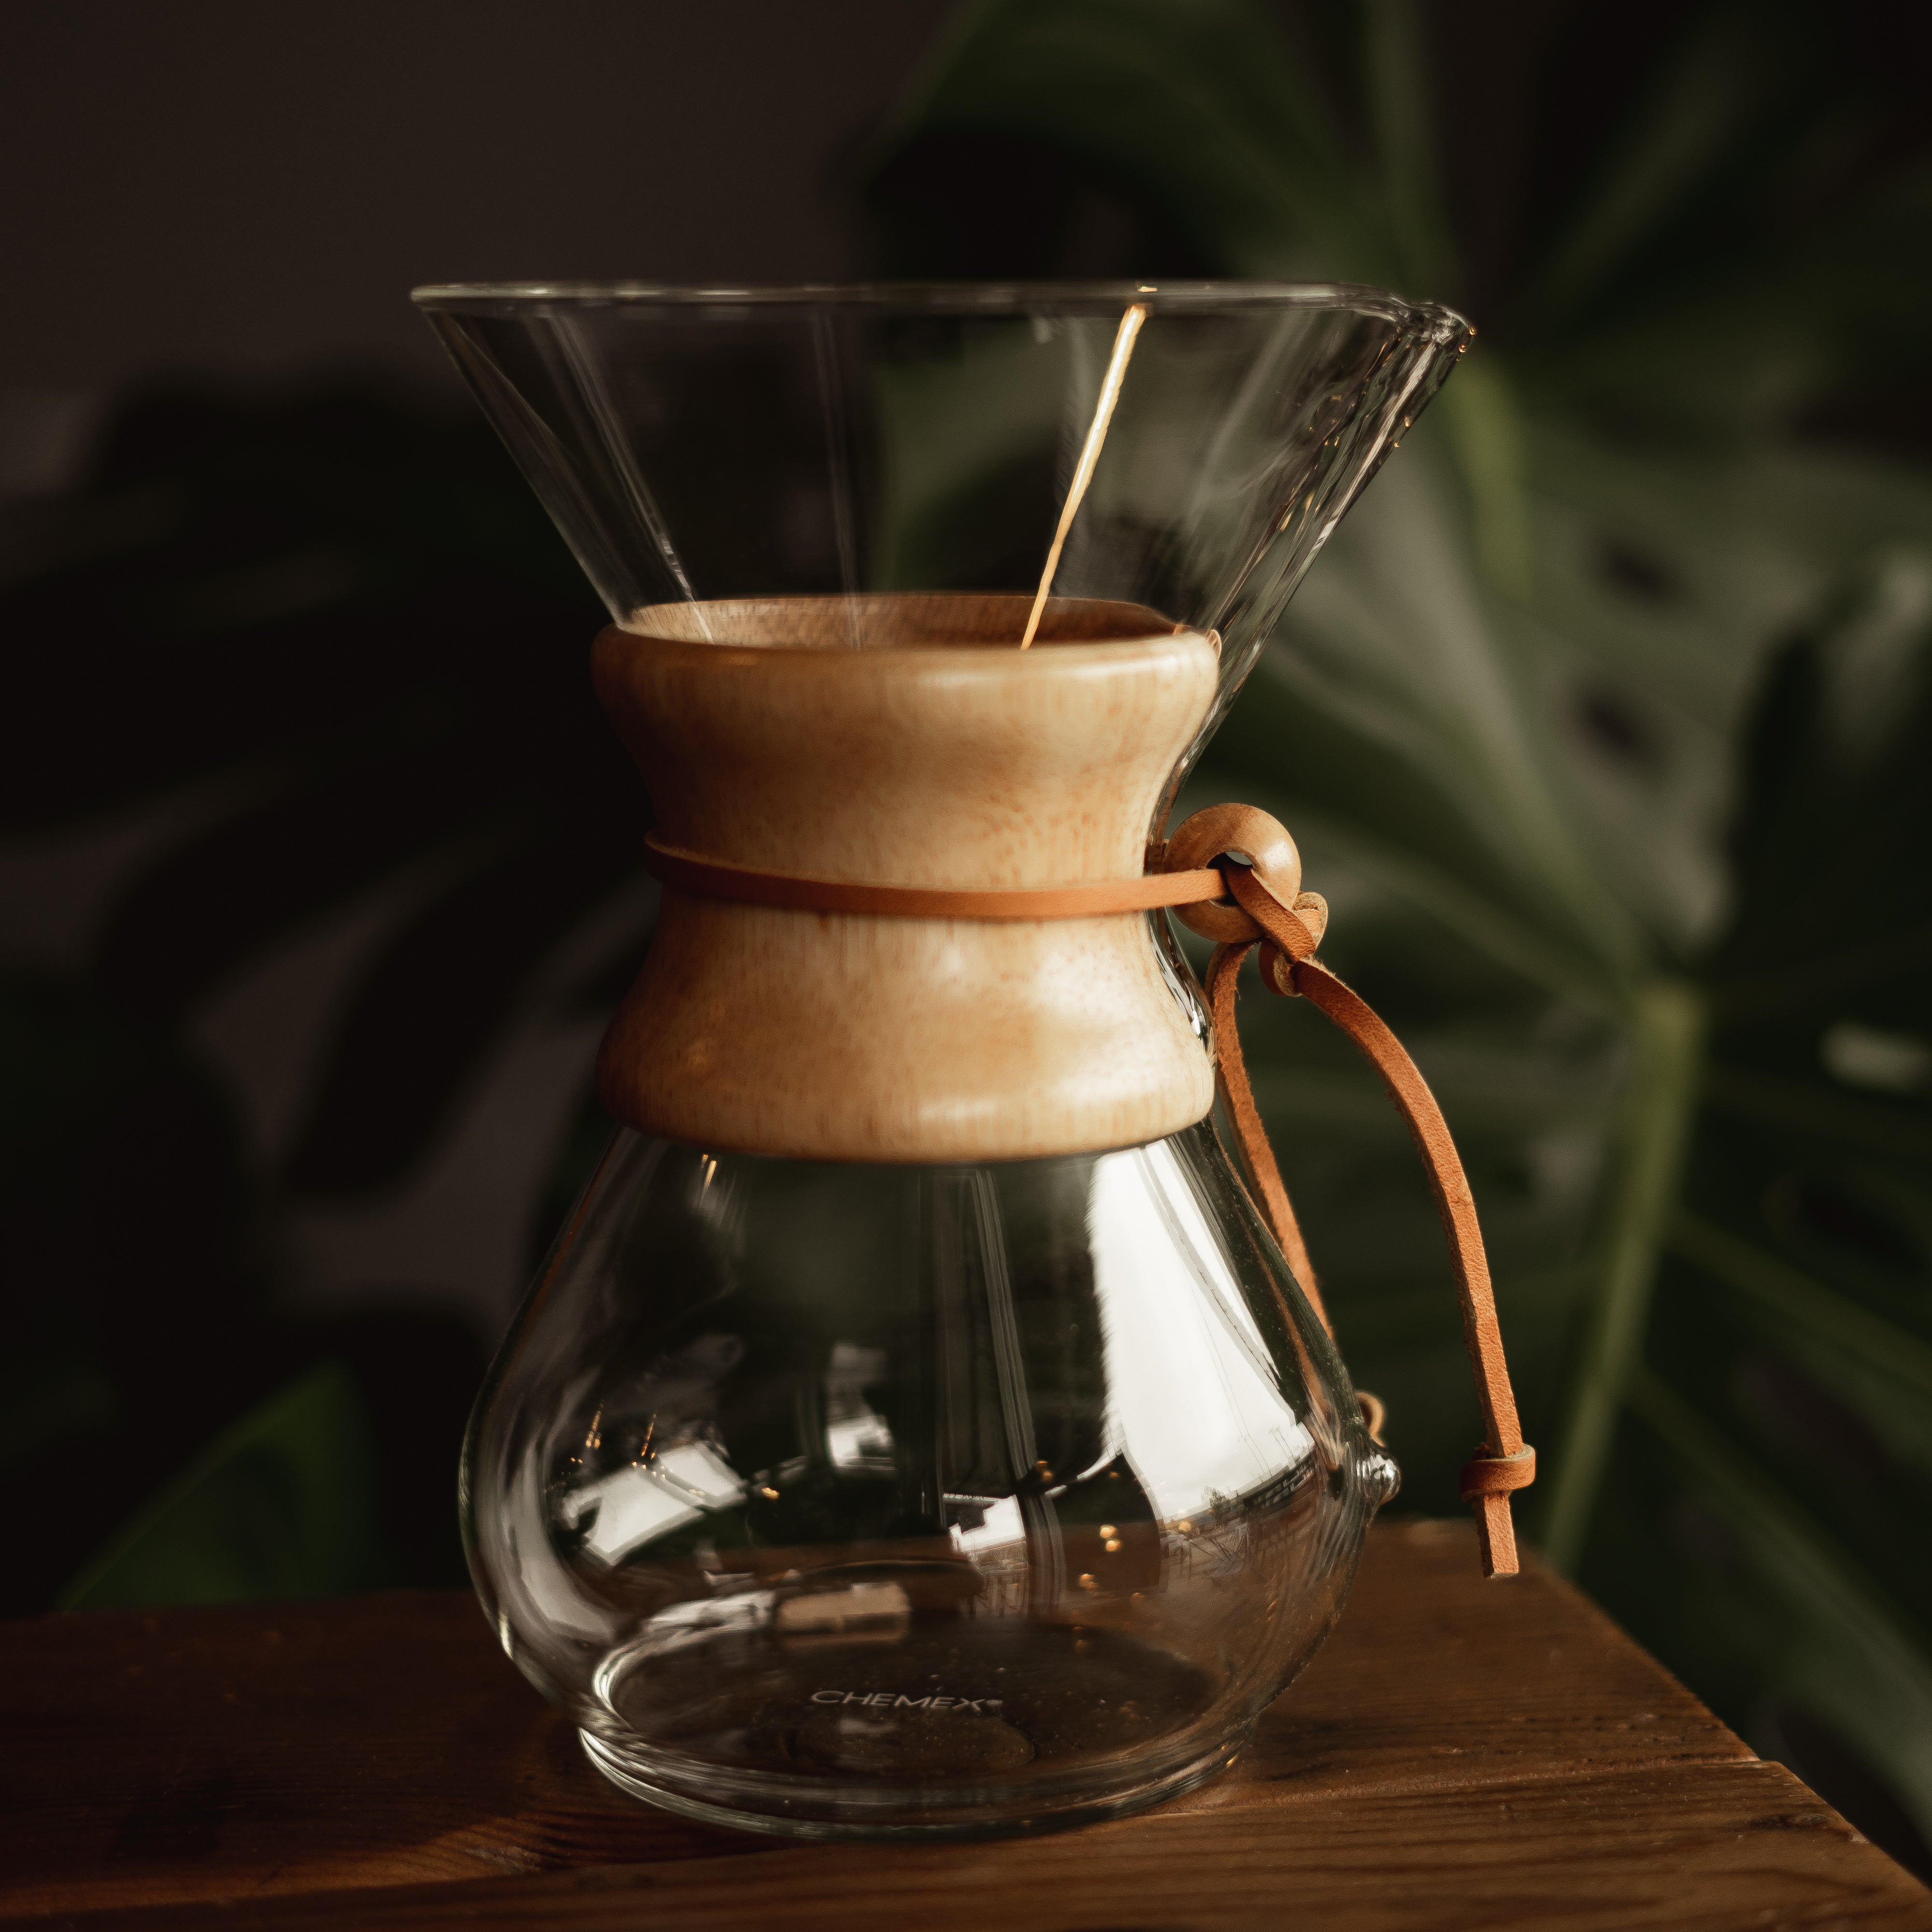 Chemex Pour-Over Glass Coffeemaker - Classic Series - 6-Cup - Exclusive  Packaging